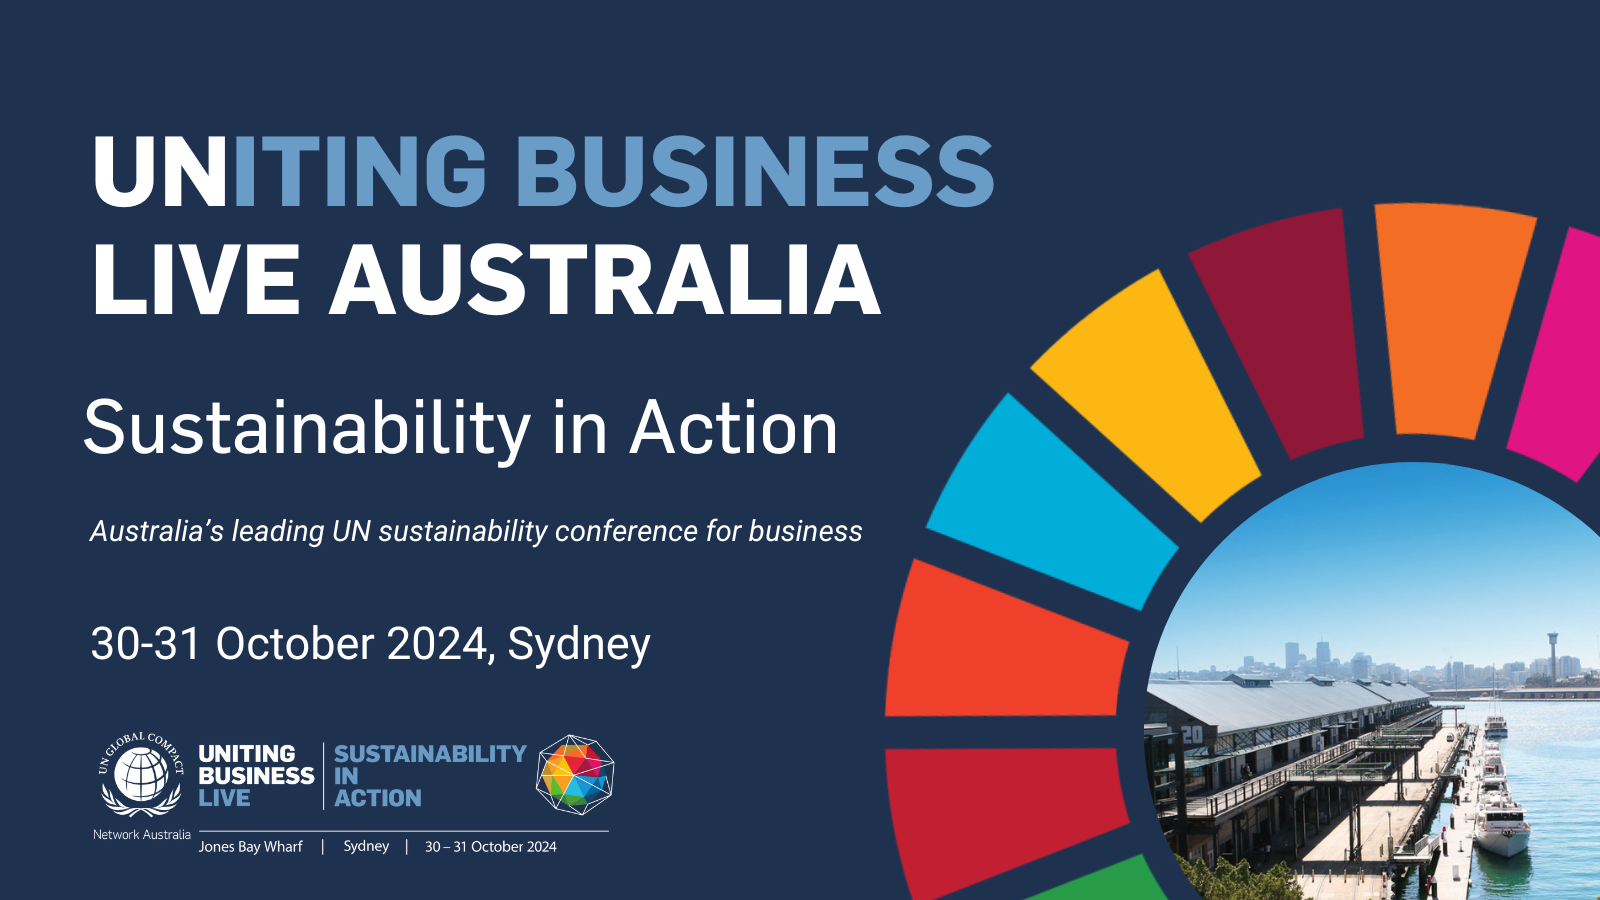 UNiting Business LIVE Australia | Sustainability in Action